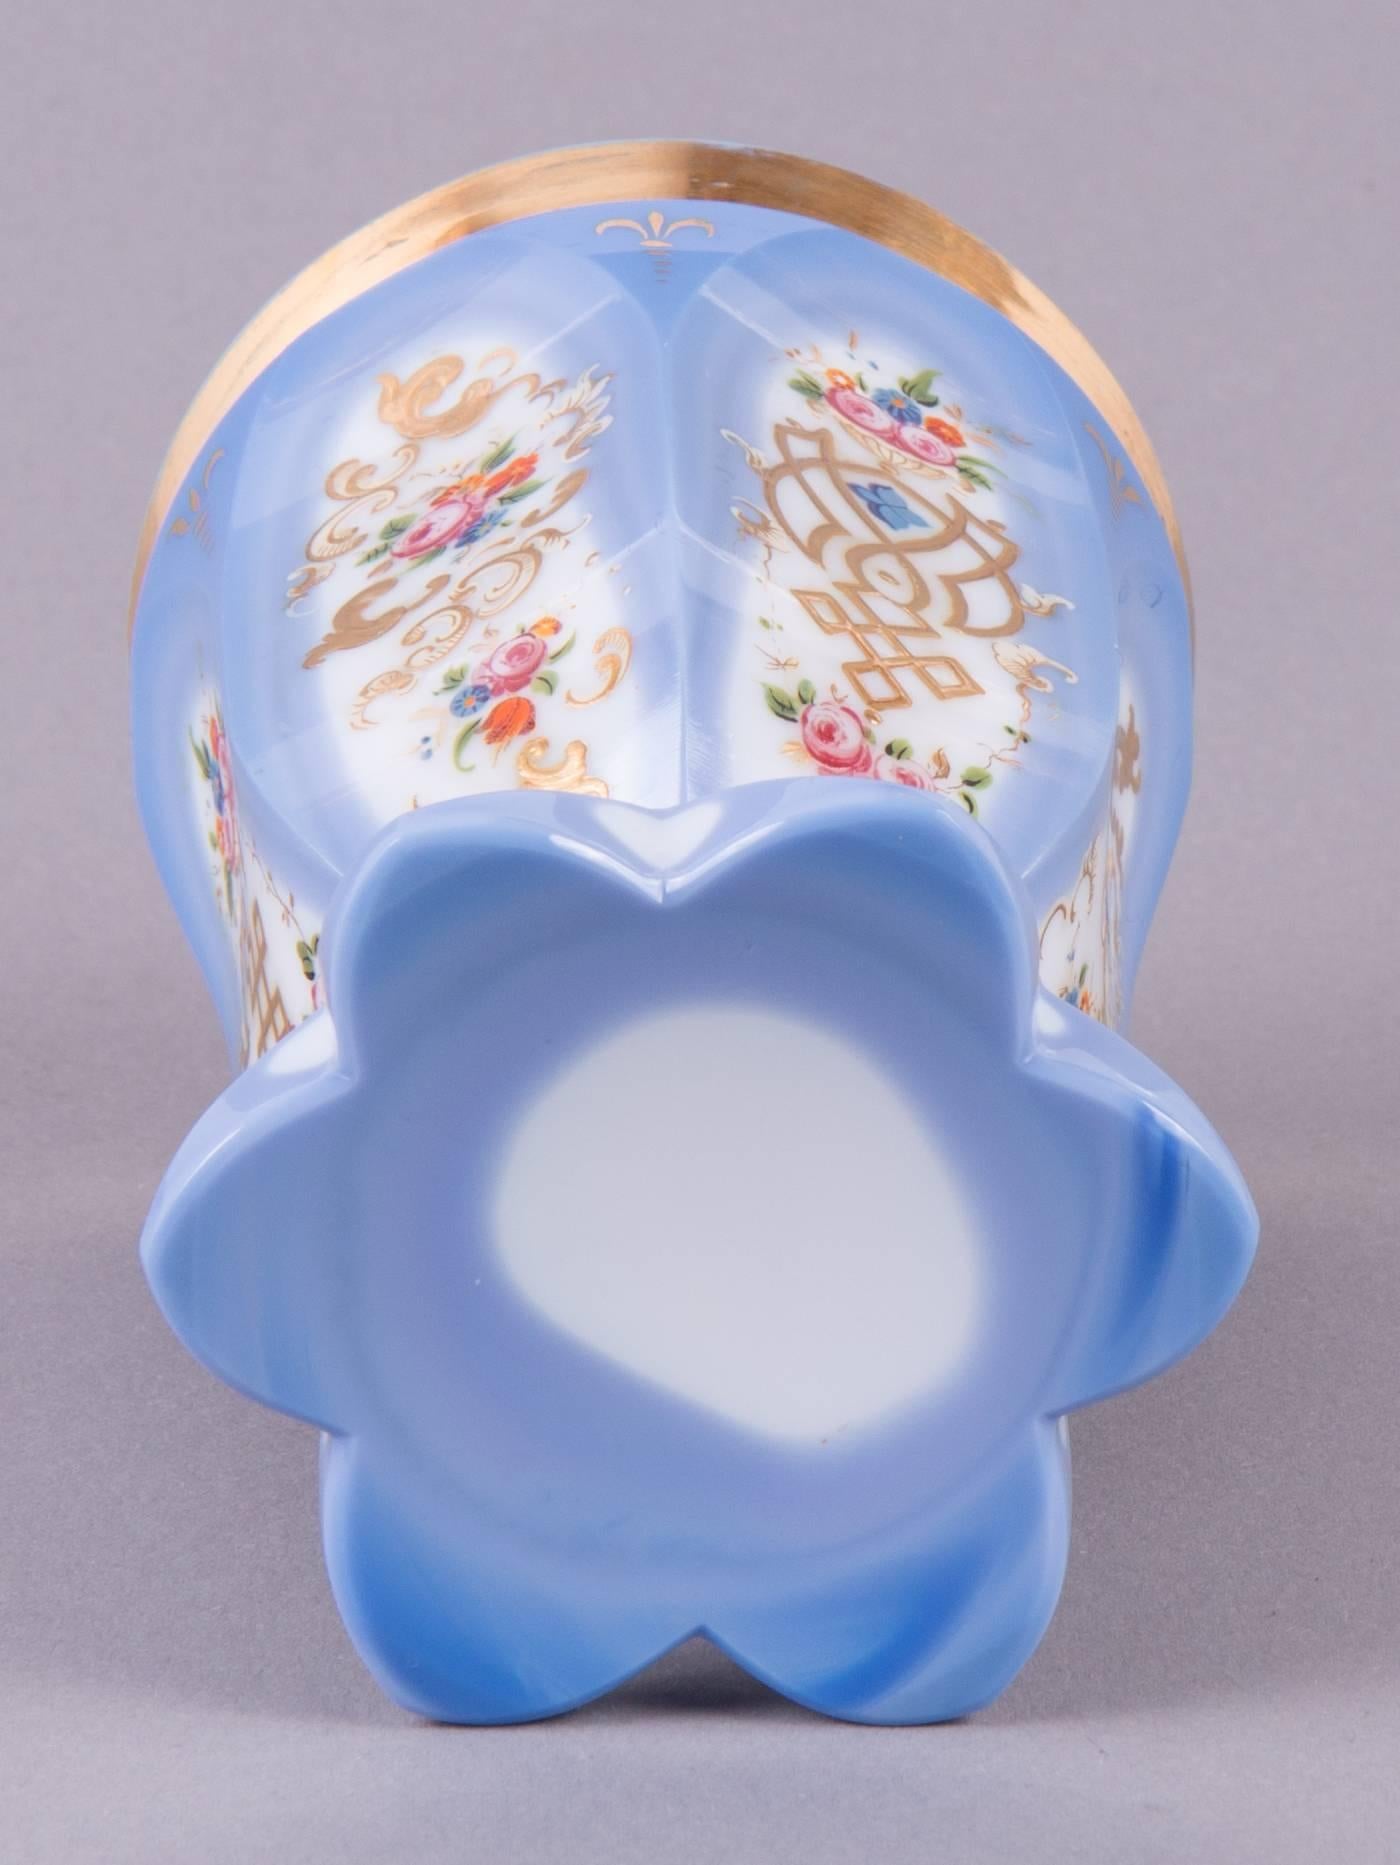 Bohemia, circa 1830-1850.
Boneglass, light blue and white with gold and enamel painting.